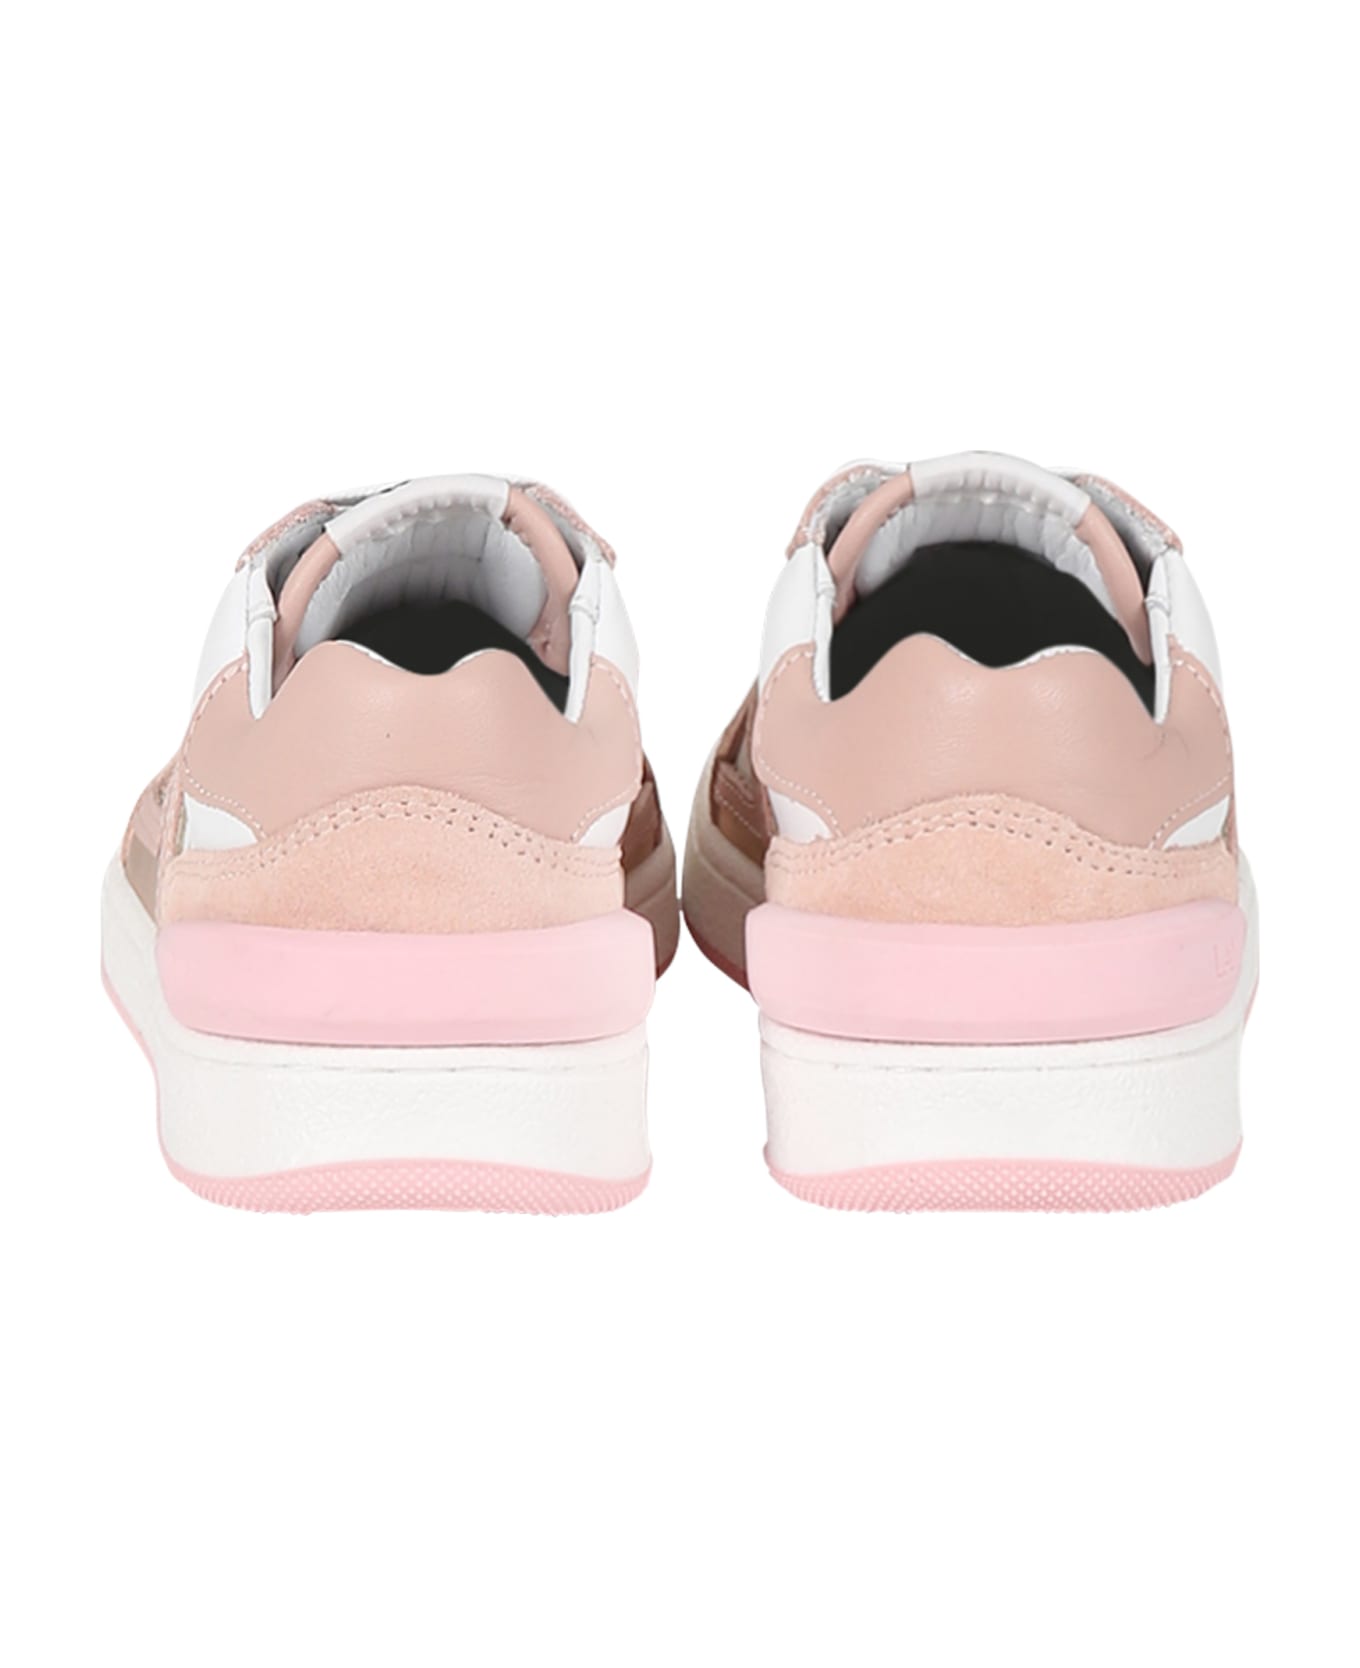 Lanvin Pink Sneakers For Girl With Logo - Pink シューズ